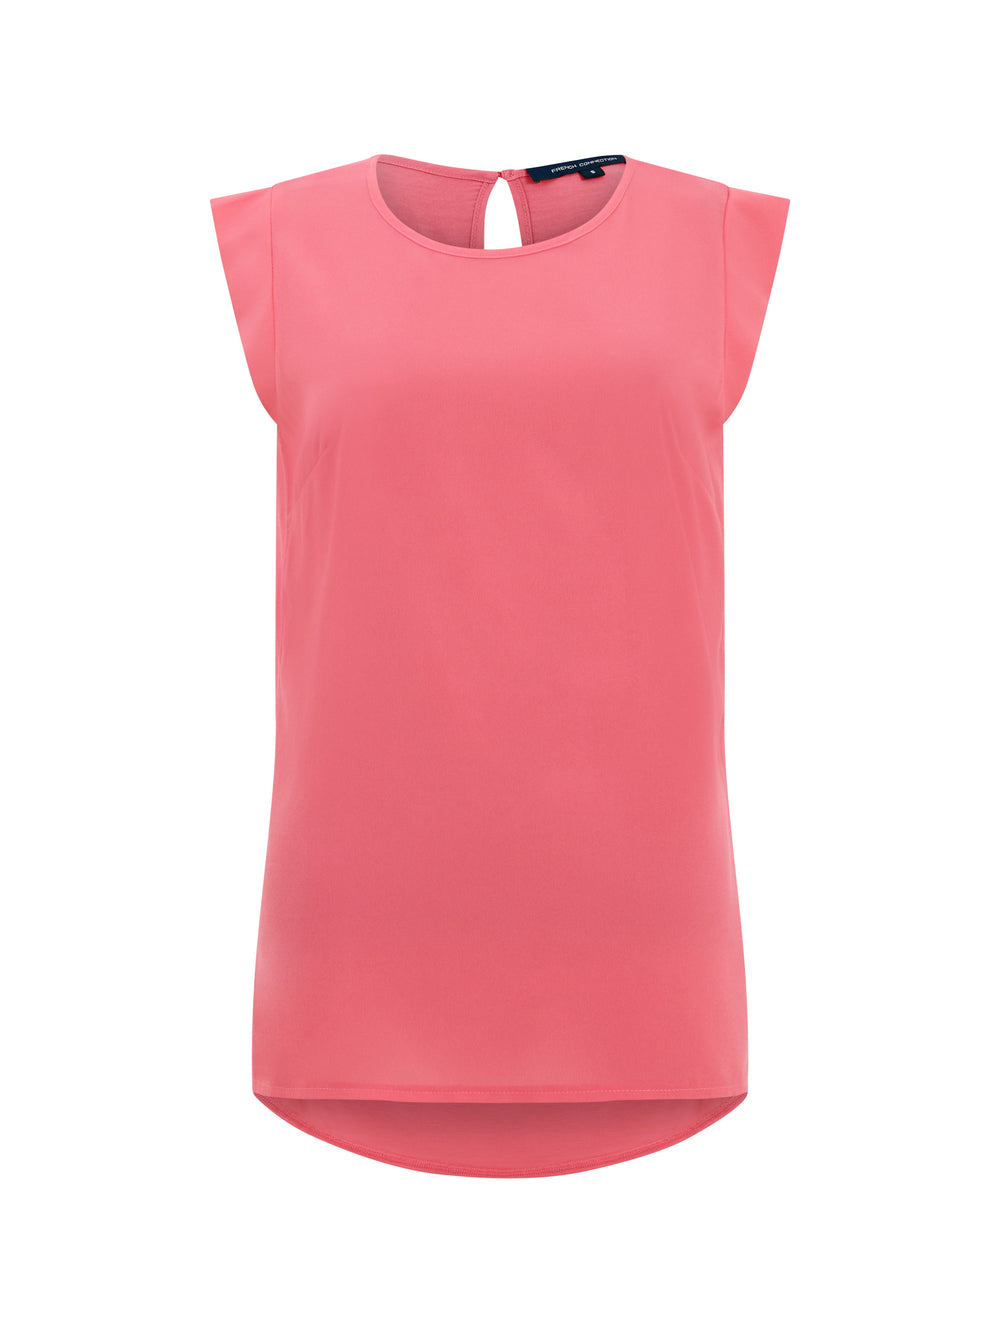 Crepe Light Cap Sleeve Top Camilla Rose | French Connection UK